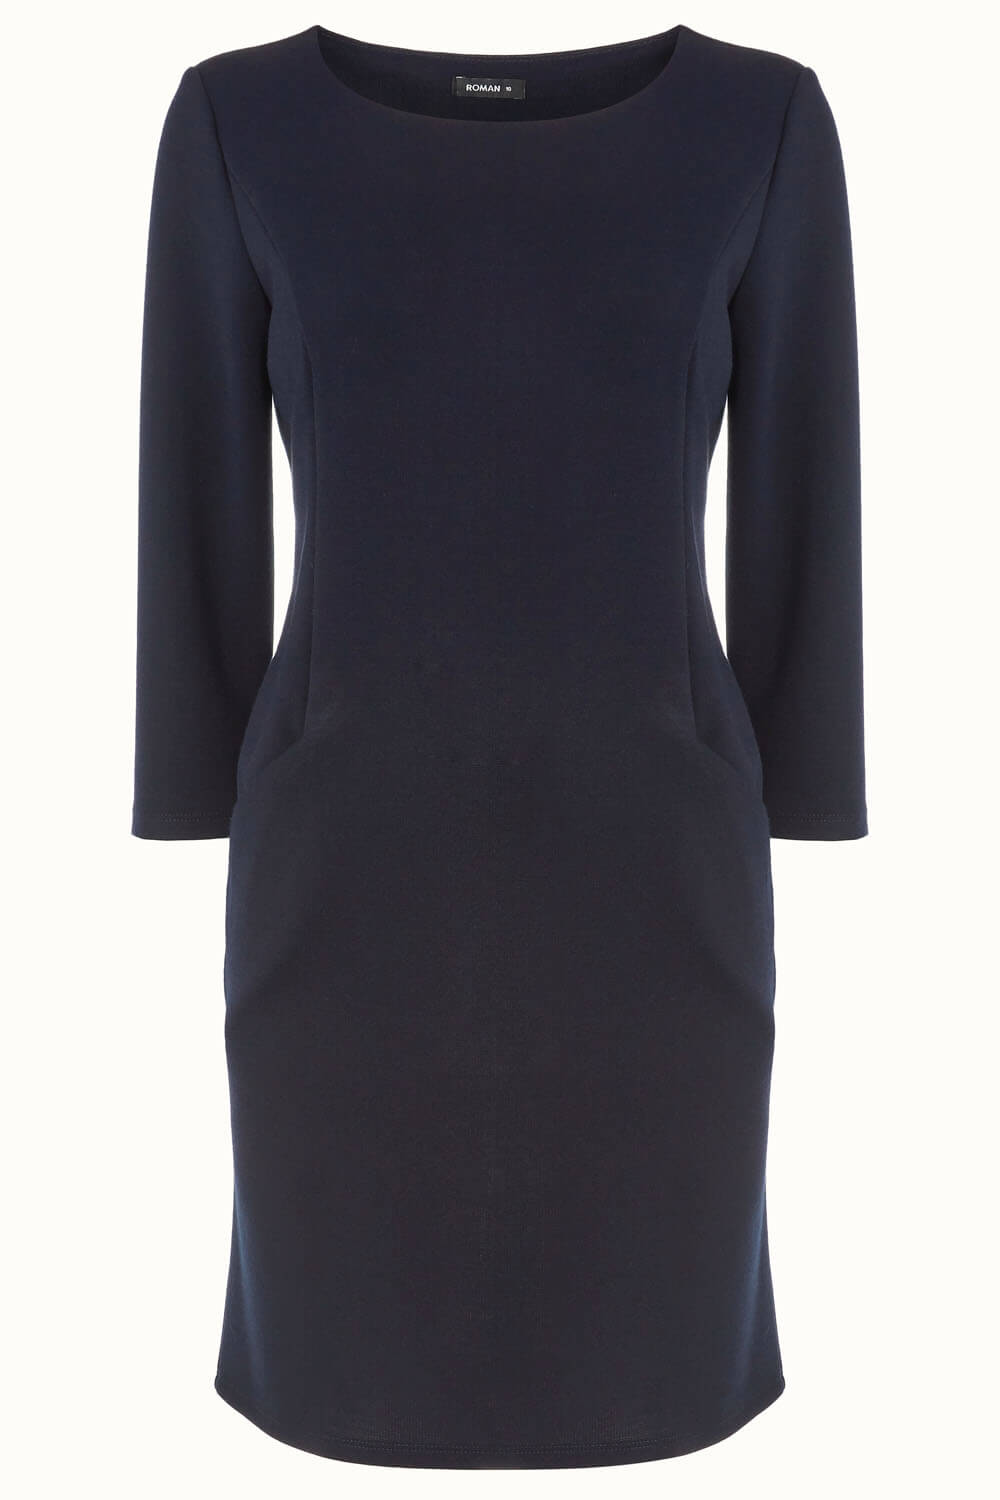 Navy  Relaxed Pocket Shift Dress, Image 5 of 5